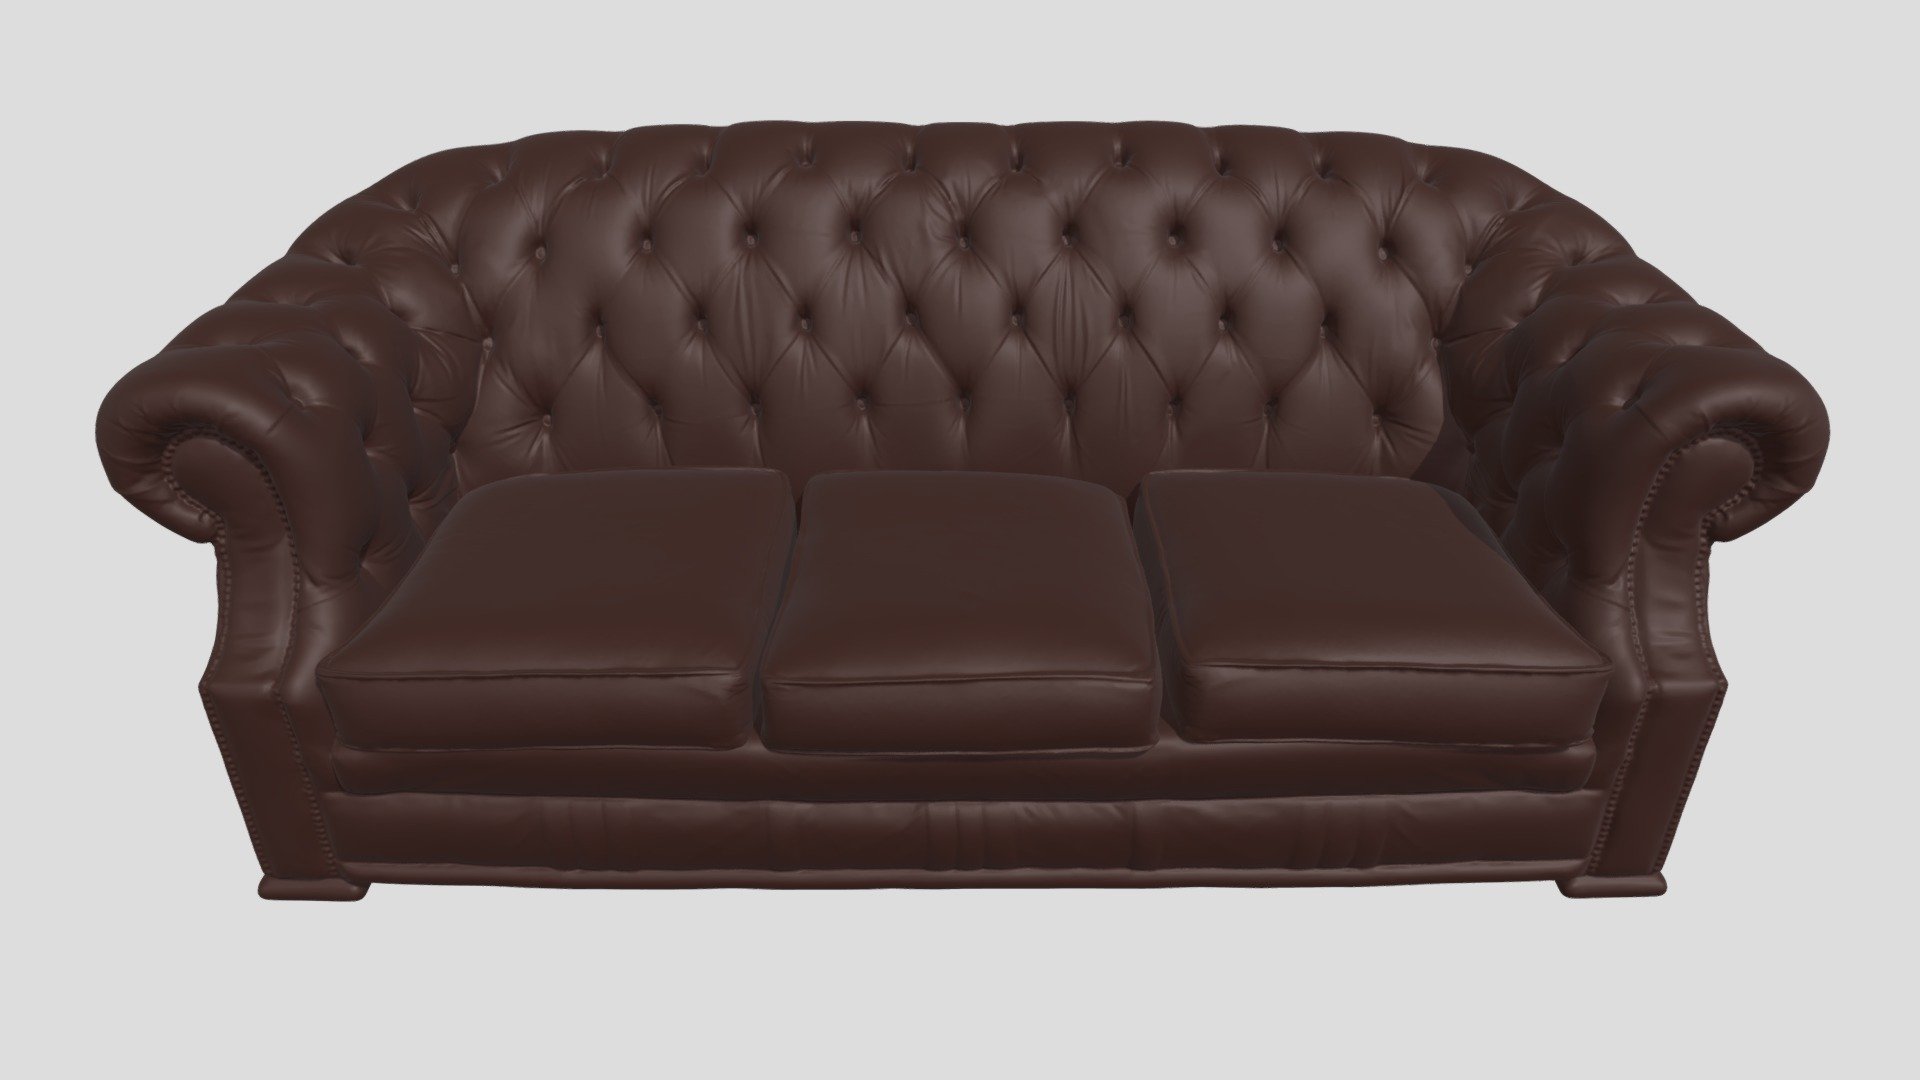 The 3D model is a 3D scan of a Winchester sofa Chesterfield. The model is cleaned up and optimized in Zbrush. The 3D model can be used as an interesting decoration object for interior 3D rendering or as a reference for modeling and retopology The model can be used as furniture for interior in miniature houses.

Dimensions: 137,3 x 54,5 x 64,6 mm - WINCHESTER SOFA CHESTERFIELD - Buy Royalty Free 3D model by 3Dlab Budapest (@sigi) 3d model